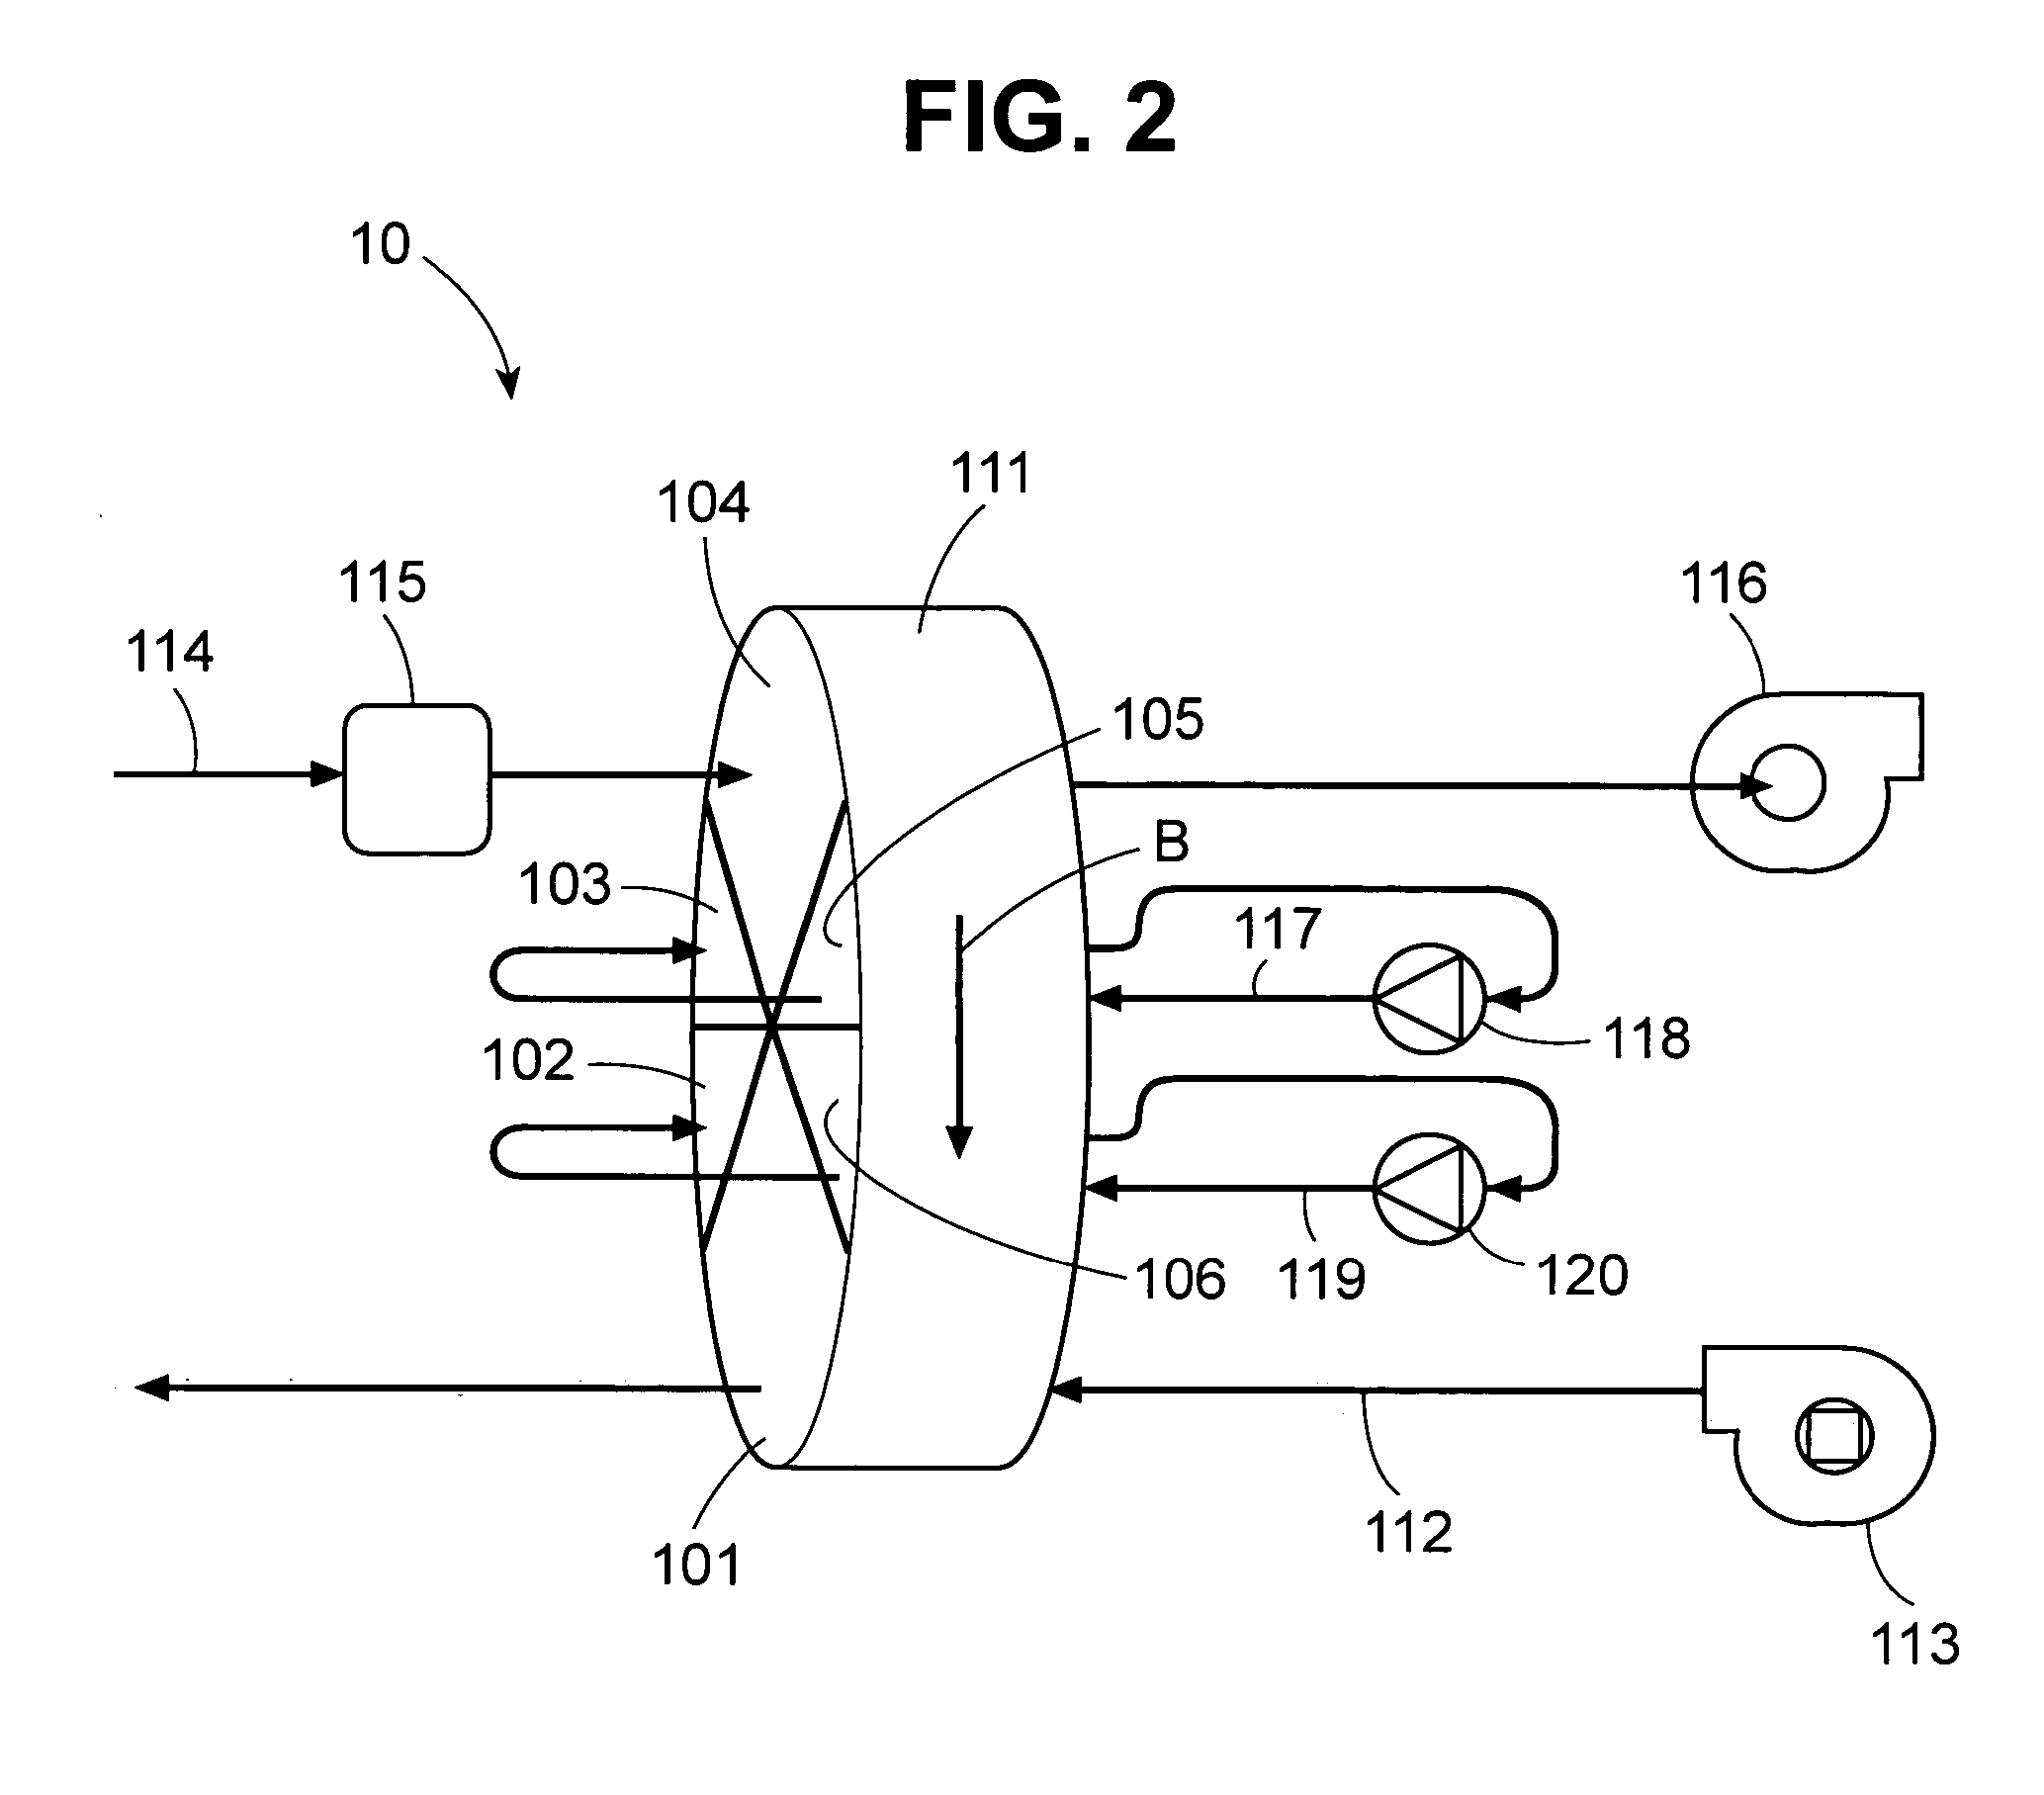 Rotary bed sorption system including at least one recycled isolation loop, and methods of designing and operating such a system